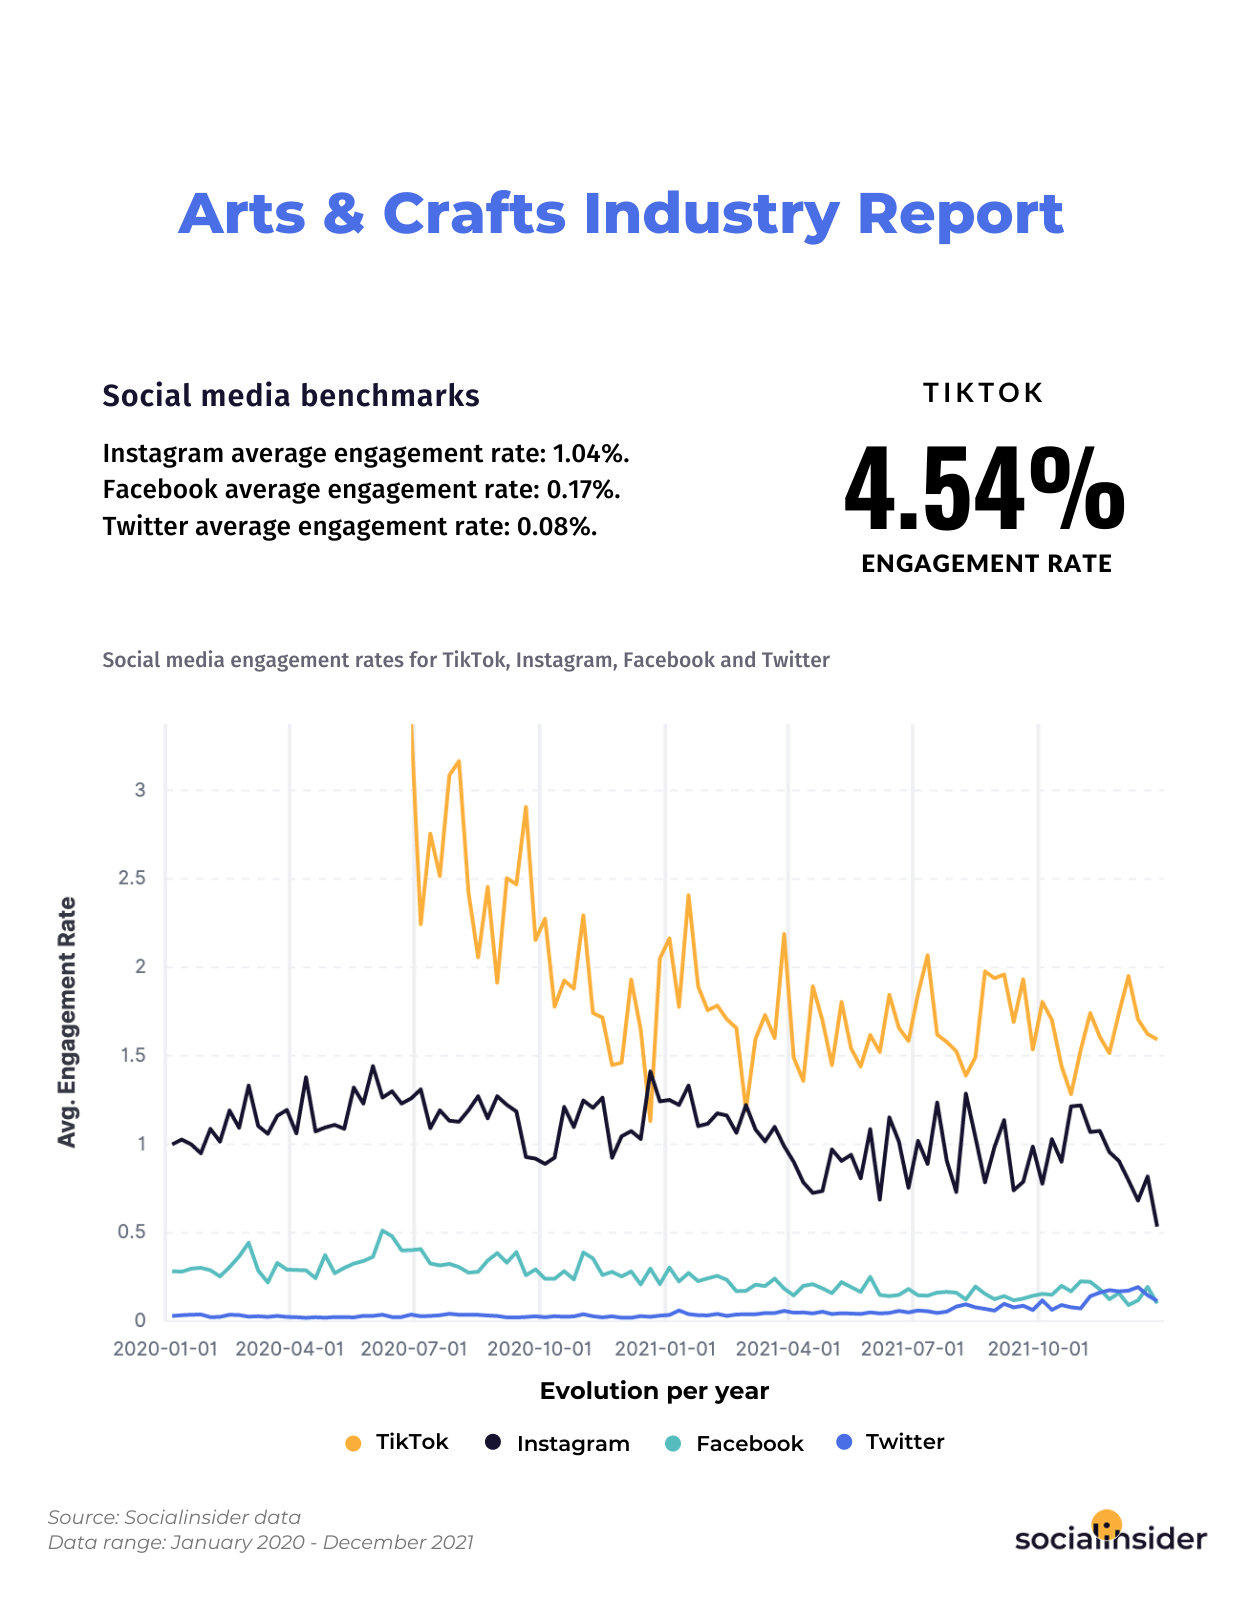 Engagement rates for the arts & crafts industry for 2022